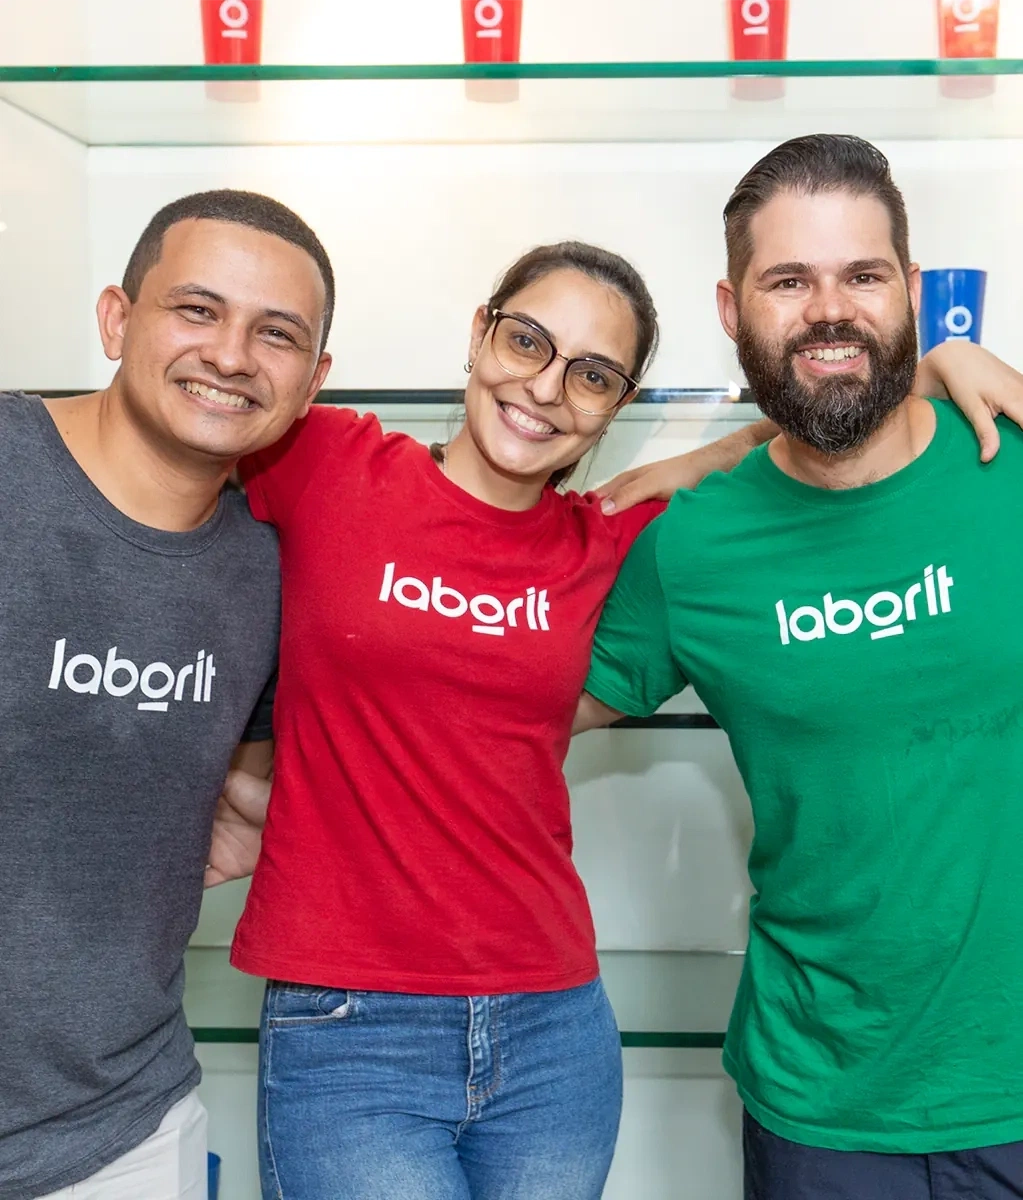 Labs during the Laborit event. From left to right: Jackson Passos, Camila Tavares and Ulisses Ribeiro